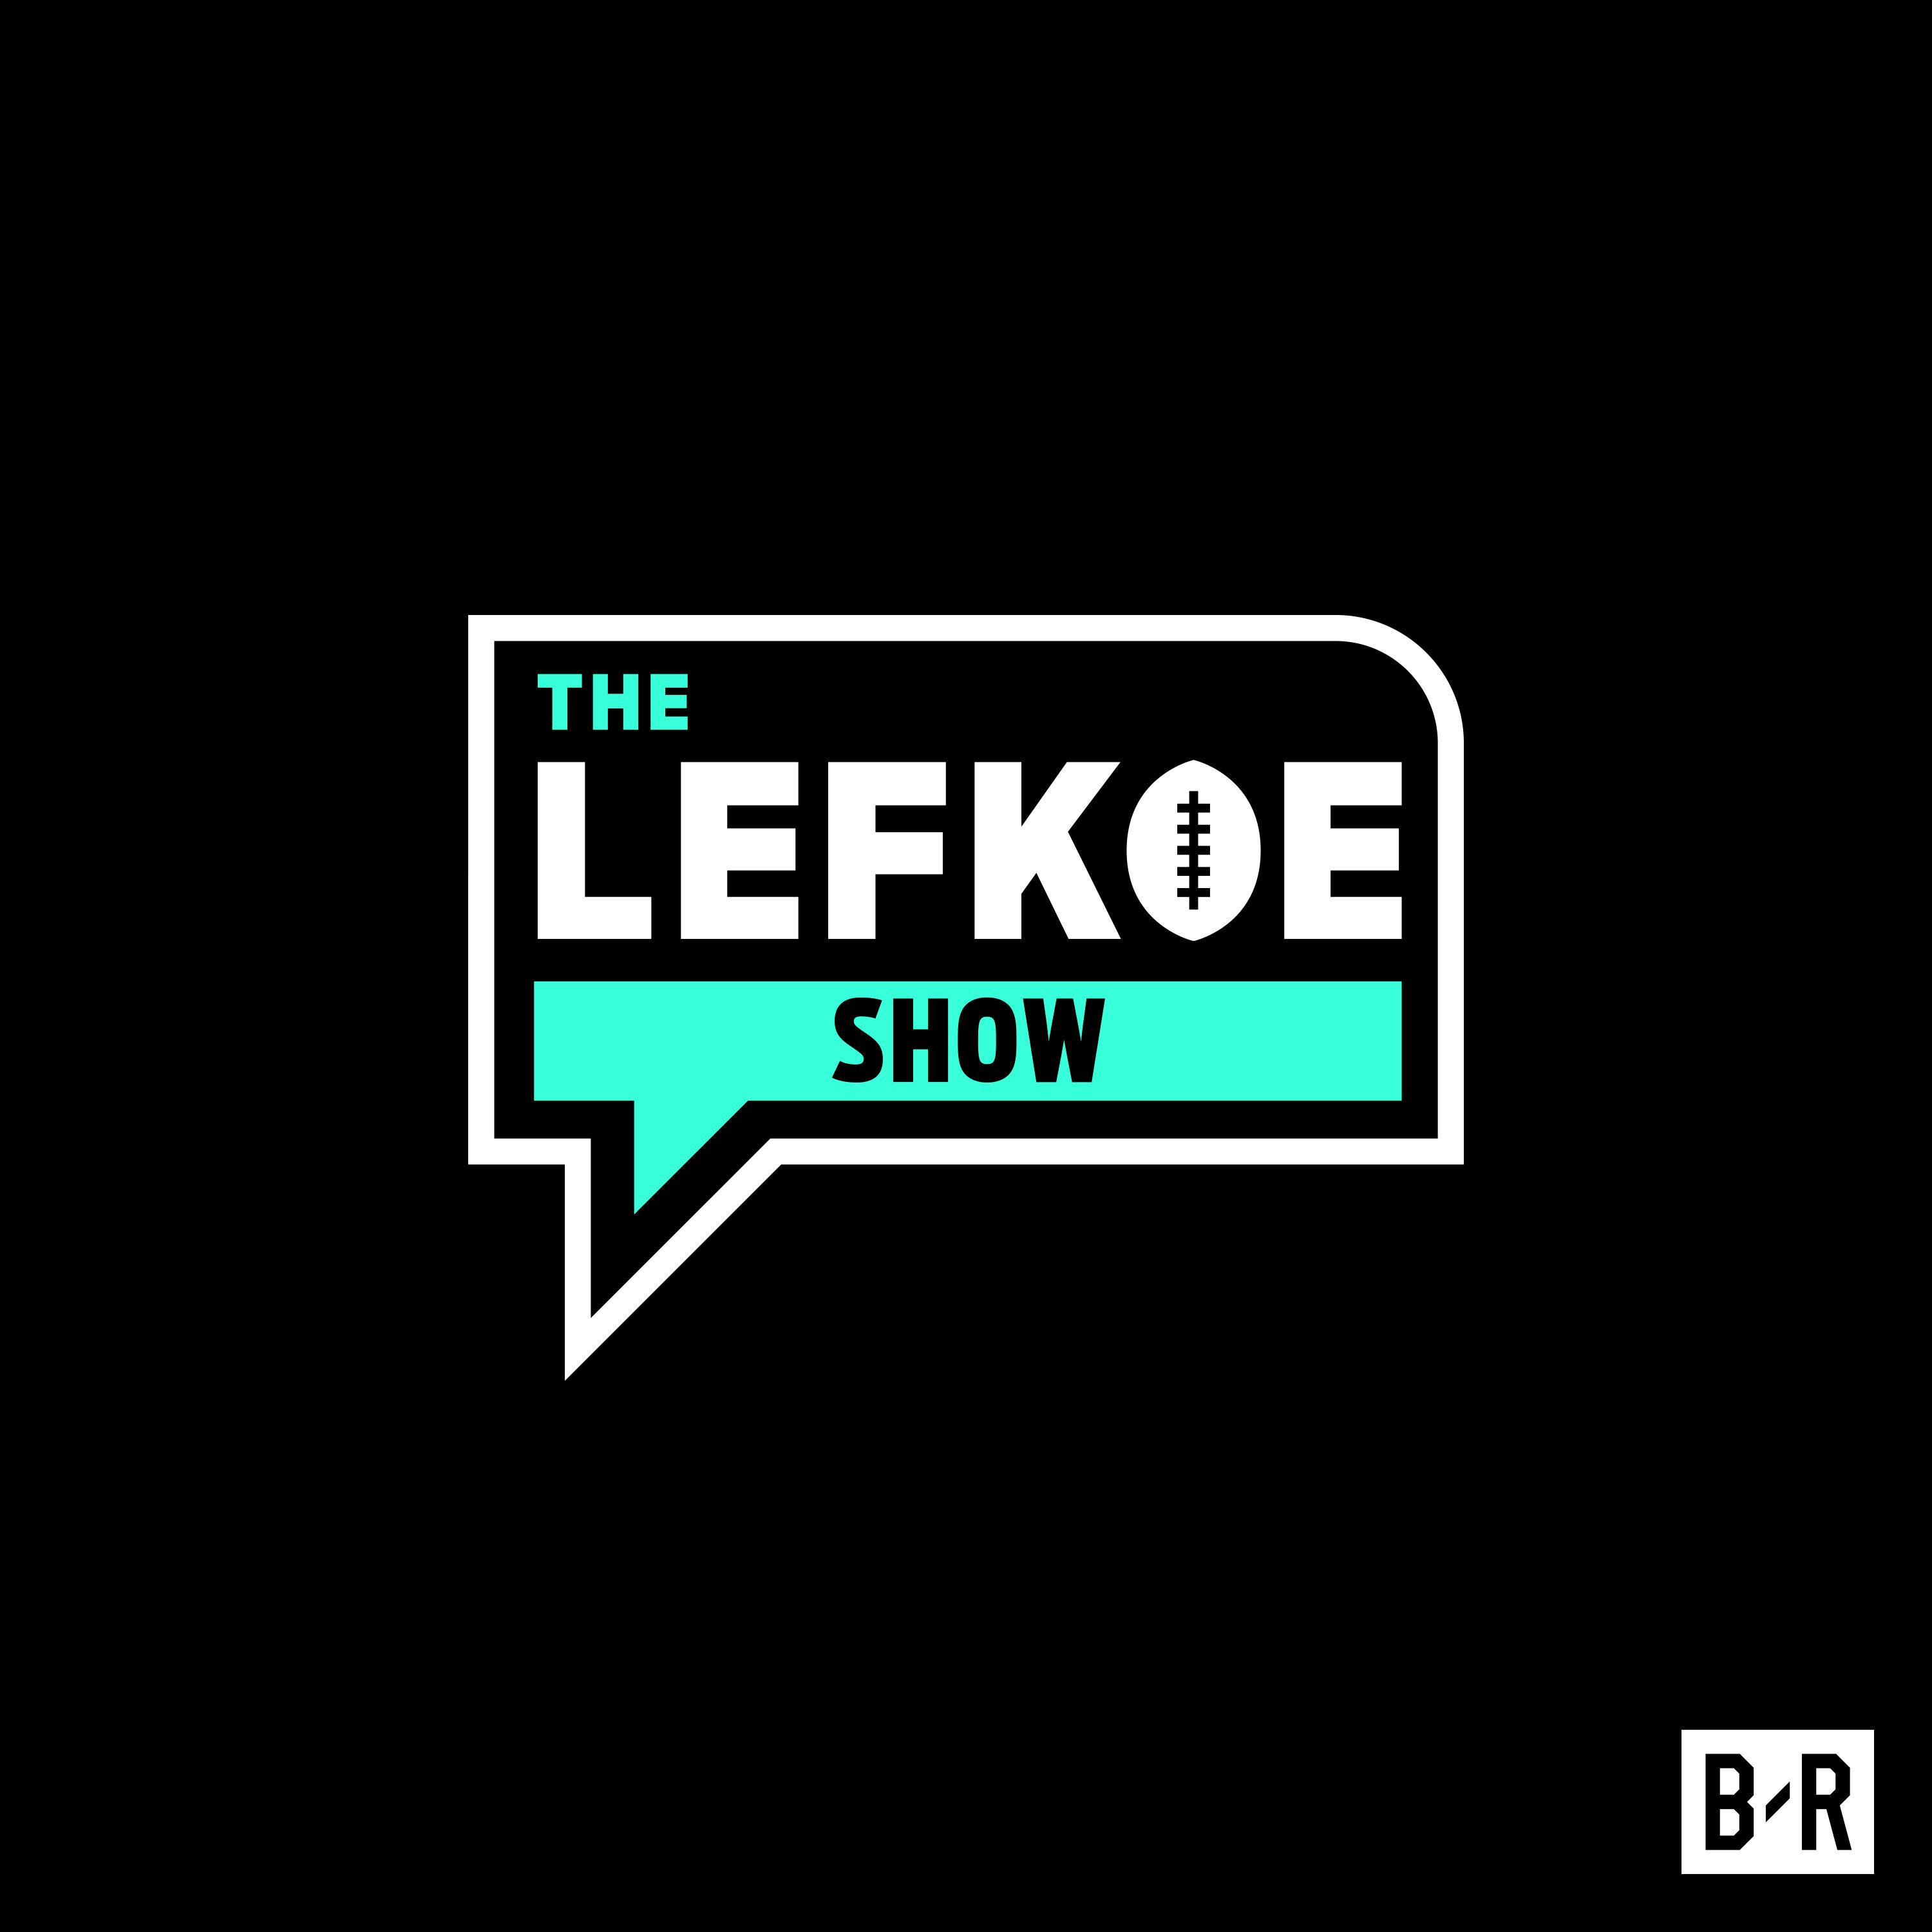 Andrew Whitworth on Outlasting Everyone in the NFL, Mentoring Young Players, and the Rams 2020 Offense | The Lefkoe Show